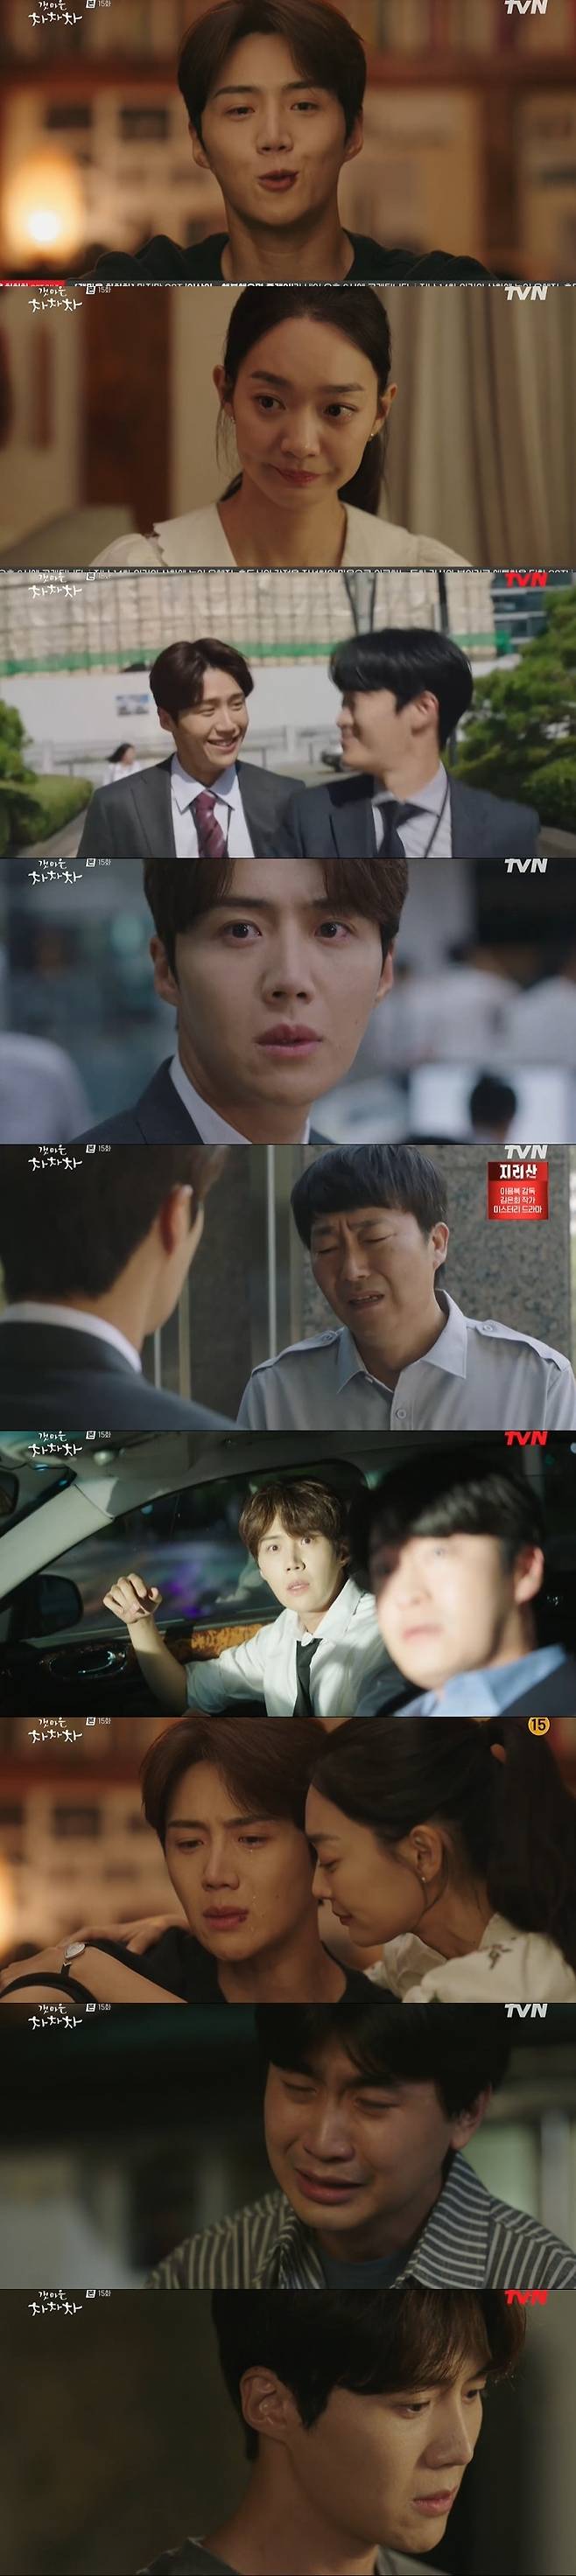 Seoul=) = The past of Hometown Cha-Cha-Cha Kim Seon-ho has finally been revealed, and then, as he was about to break away from the past, he came again with sadness.Kim Young-ok and sad farewell came to make viewers even more sad.In the 15th episode of TVNs weekend drama Hometown Cha-Cha-Cha (playplayed by Shin Ha-eun/directed Yoo Jae-won), which was broadcast on the 16th, Kim Doha (played by Lee Seok-hyung) was Mr.Handy, pictured angry at the name of Hong Doo-sik (Kim Seon-ho), who was called Mr Hong.Kim Doha has known Hong Doo-sik only as Mr. Handy, Mr Hong, and confirmed his real name and came at him.He hit Hongdusik and then shouted, We couldnt walk because of you, our healthy father. Its nothing more than a murderer. And then he said, Are you running again?I have been a good man in the world for half a year, wearing a mask and being our Father vegetable. Yoon Hye-jin (Shin Min-ah) followed a precariously walking Hong-Doo-sik, who told him not to follow such a Yoon Hye-jin.So, Yoon Hye-jin said, Im worried about going with you. But Hong Doo-sik said, Im not mistaken.Doha father is the one who made it, he said. I broke the family in the picture. I killed my brother. Yoon Hye-jin backed away, returned home, and was in a bad mood, too; when Hong Doo-sik did not work, the resonance became more busy due to lack of workers.Everyone was worried about Hong Du-sik.Kim Doha told Ji Sung-hyun (Lee Sang-min): Im sorry about Agnaldo Timóteo, I was a back-up, but I ruined everything.I should not do that. So Ji Sung-hyun asked, Can I ask what you said then? Kim Doha said, Our father worked as a guard.Hong Doo-sik was the company exchange-traded fund manager who my father was. He joined Father in his exchange-traded fund.Father, who does not know anything, invested in a loan, but a few years ago, the situation broke out. The global stock price plummeted and the exchange-traded fund was halved, and Father tried extreme Choices to the impact, Confessions said.I did not know I would meet Hong Doo-sik there, he said. I heard that Hong Doo-sik was not one of the people who ruined his life.Ji Sung-hyuns sister, Sun-ah (Kim Ji-hyun), was the husband of Hong Doo-sik. Ji Sung-hyun recalled the time when Park Woo was in an accident.Hong Doo-sik confided in his past when Yoon Hye-jin came to him, saying, I had a brother.Park Jung Woo was assigned the same room in the dormitory, but I was a freshman and my brother was a returning student. Moy Yat, you drink, you drink, you drink. And we celebrate the anniversary of Grandpa. He said, I knew because of my brother.I would feel like this if I had a brother. In fact, the company went in with you, because you were an Exchange-traded fund manager, Hong said. At first, I had a lot of trouble.I didnt like it because I thought I was making money and my major was different. But my brother told me.Exchange-traded fund manager is giving hope to ordinary people that they can be rich. I think that made me feel a lot. It was surprisingly fun, I got the aptitude, I made a lot of money, I met a lot of new people, he said.I was close to Moy Yat and said, Im close.Hong Doo-sik said that Kim Dohas father wanted to join the Exchange-traded fund, which had a fairly high return, but he was dry because of the high risk.Since then, the stock price has plummeted, and Hong Doo-sik has asked him to wait for him, but Kim Dohas father, who has not overcome the burden, has tried extreme Choices.If I had explained more, I should have received the phone call, but it is my fault, said the surprised Hong Doo-sik.Park Woo comforted himself that he would share the burden, and then a traffic accident occurred.When he heard this, Yoon Hye-jin said, You can cry. Mr. Handy, Mr. Hong must have been hard. You can say youre sad for me.You can tell me youre sick, you can cry, he said, hugging me.Since then, Kim Doha has visited Hongdusik, and asked if Hongdusik gave money, saying that his house moved to the apartment and paid off his student loan.Hong Doo-sik handed over the money that had been disposed of at the time of Kim Dohas fathers accident. Kim Doha, who learned this, said, It was you too.Its a house thats not there anyway, so is it the price of Fathers life? Im sorry? Hong Doo-sik said, The last thing my father told me was family worry, and I remembered The Man from Nowhere saying that I wanted to wear a good suit during my sons interview.I wanted to do it for you. And then I apologized, Its my fault, I couldnt hold the hand from The Man from Nowhere. Kim Doha said, I know it is not your fault, but I needed someone to blame. I will go out to our father middle school and I will take a little more detail, and I will tell you once more that it will be okay.Im so sorry, Hong said in a stretch.Suna came to Hongdusik. Suna said, Im not sorry I did it to you. I really did not want to live at that time.I want to live because I breathe, eat, drink water, and laugh and live like that on some days. He said, Dussie, I do not blame you anymore.So you can stop forgiving yourself now. Hong Doo-sik felt the comfort of Park Woo. Park Woo said, Its not your fault, Du-sik.I do not want to be you instead of me, he said. What you want to do is until you get tired and meet again when you want to live well.When we meet then, we will fish together. Hong Doo-sik once again confessed his past that I was actually going to die then when Yoon Hye-jin said, Do not laugh if I can be so happy.I lived and my brother ran out of the hospital when I heard that he was wrong, he said. I stopped walking without a salt, but I wanted to end my life here. I thought about the time I received a letter from Kim Young-okHong Doo-sik said, I was neglected because I was busy living, but I forgot that the letter was wrong to write and spell. Agnaldo Timóteo African Methodist Episcopal Church, who decided to die, saved me.Thats why Im back, he said, after which he confessed that people had become Mr. Handy, Mr. Hong, asking him to work.The resonance saved Mr. Handy, Mr. Hong. Now I know. Mr. Handy, why Mr. Hong liked the resonance so much.Why did you think so much about the small sea village that is not special or great? Hong Doo-sik said, Im sorry to have kept you waiting for a long time.Yoon Hye-jin said, Thank you for the courage, Confessions, and Hong Doo-sik asked what Yoon Hye-jin was trying to say to him.Yoon Hye-jin said, I actually received a clinical professor proposal. Hong Doo-sik asked, Is it Seoul?Meanwhile, Kim African Methodist Episcopal Church failed to sleep with the eldest (Lee Yong-i) and Park Sook-ja (Shin Shin-ae).I think its the day before the picnic, he said.First, the eldest, who woke up, felt that Kim, who did not wake up, had passed away.Go ahead and wait, he said, sending him warm.